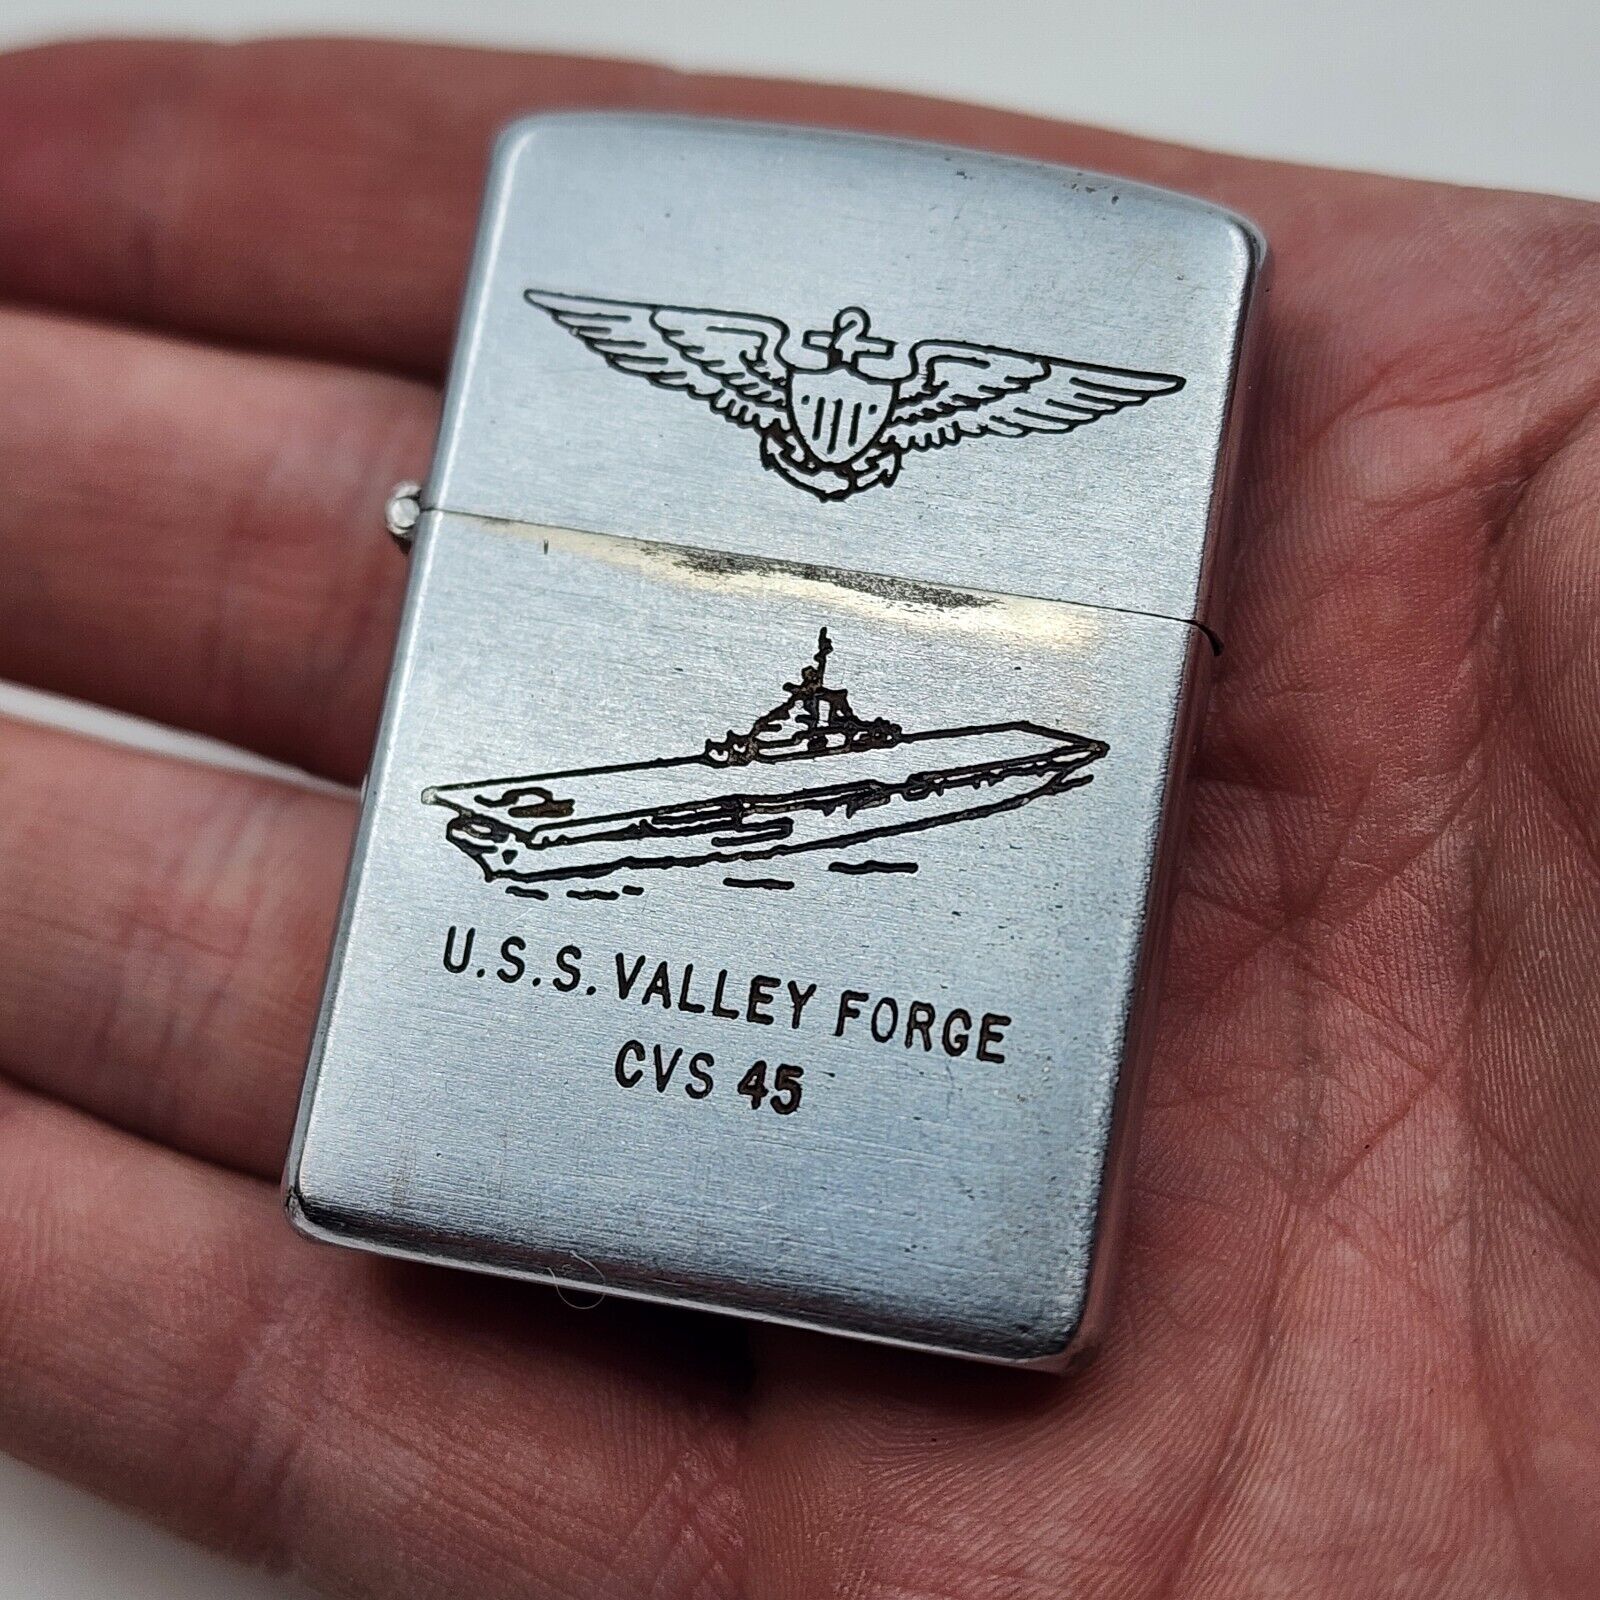 Vintage Zippo Lighter 1950S Brushed Metal, Patent 2517191 USS valley forge NAVY